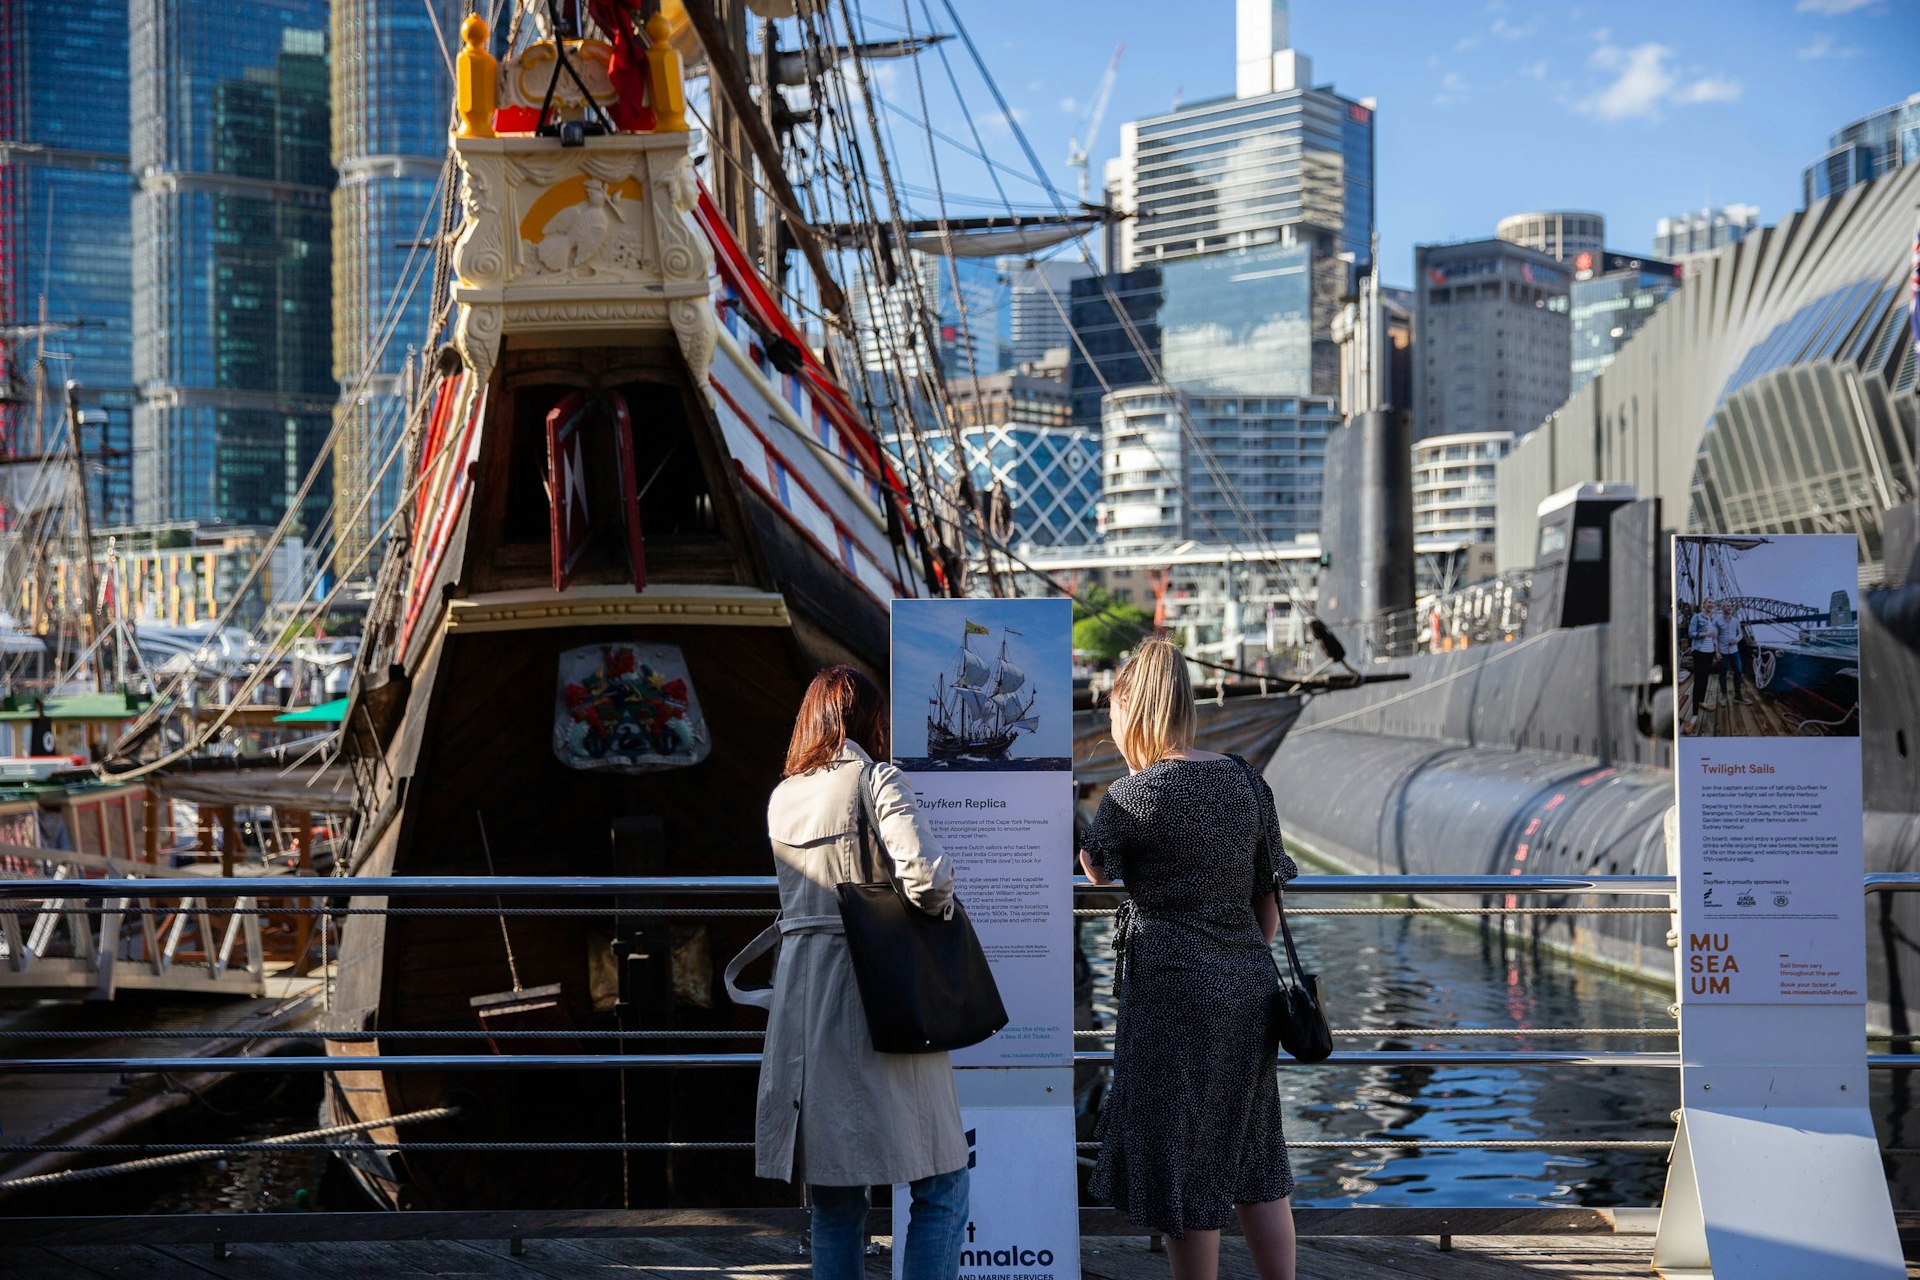 Two women stand on a dock in front of a an old wooden ship outside the Australian National Maritime Museum